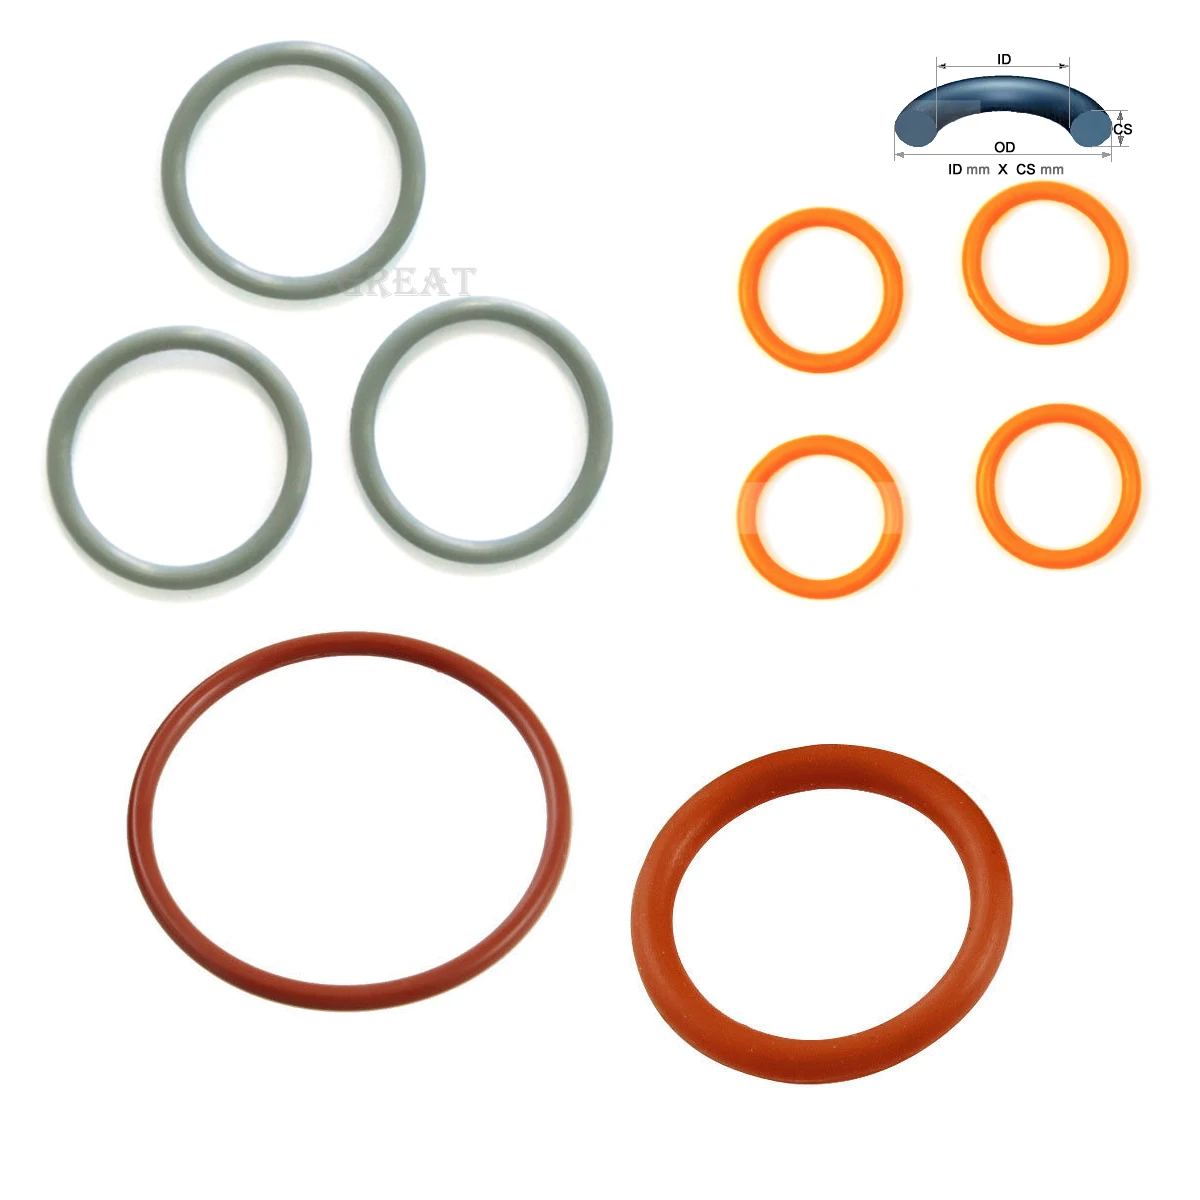 Rings DINGGUANGHE CS2.65mm EPDM O Ring ID 47.5/50/51.5/53/54.5/56.5x2.65mm O-Ring Gasket Seal Exhaust Mount Rubber Insulator Grommet 50PCS ORING Gasket Size : ID51.5x2.65mm 